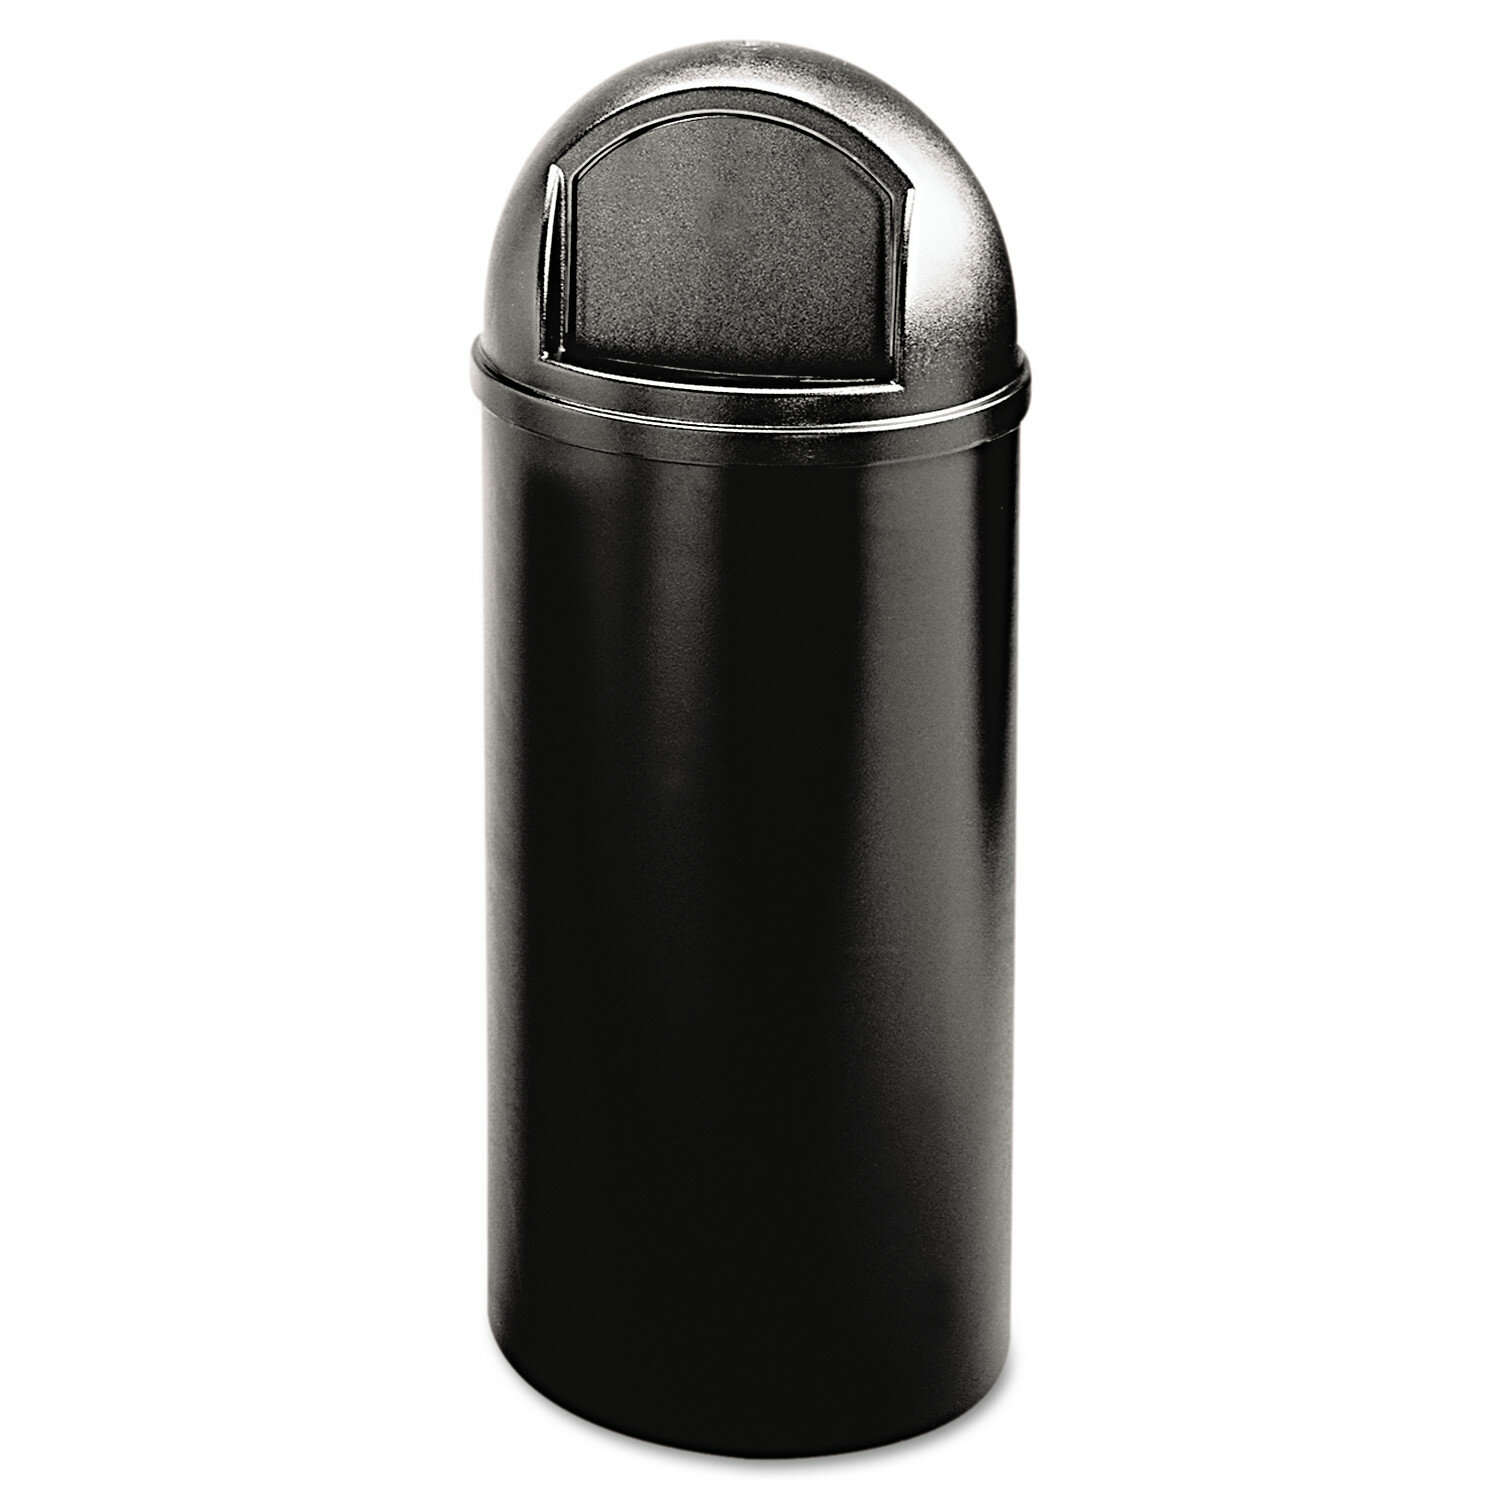 Rubbermaid Commercial Products Plastic Trash Can ( 15 Gallons